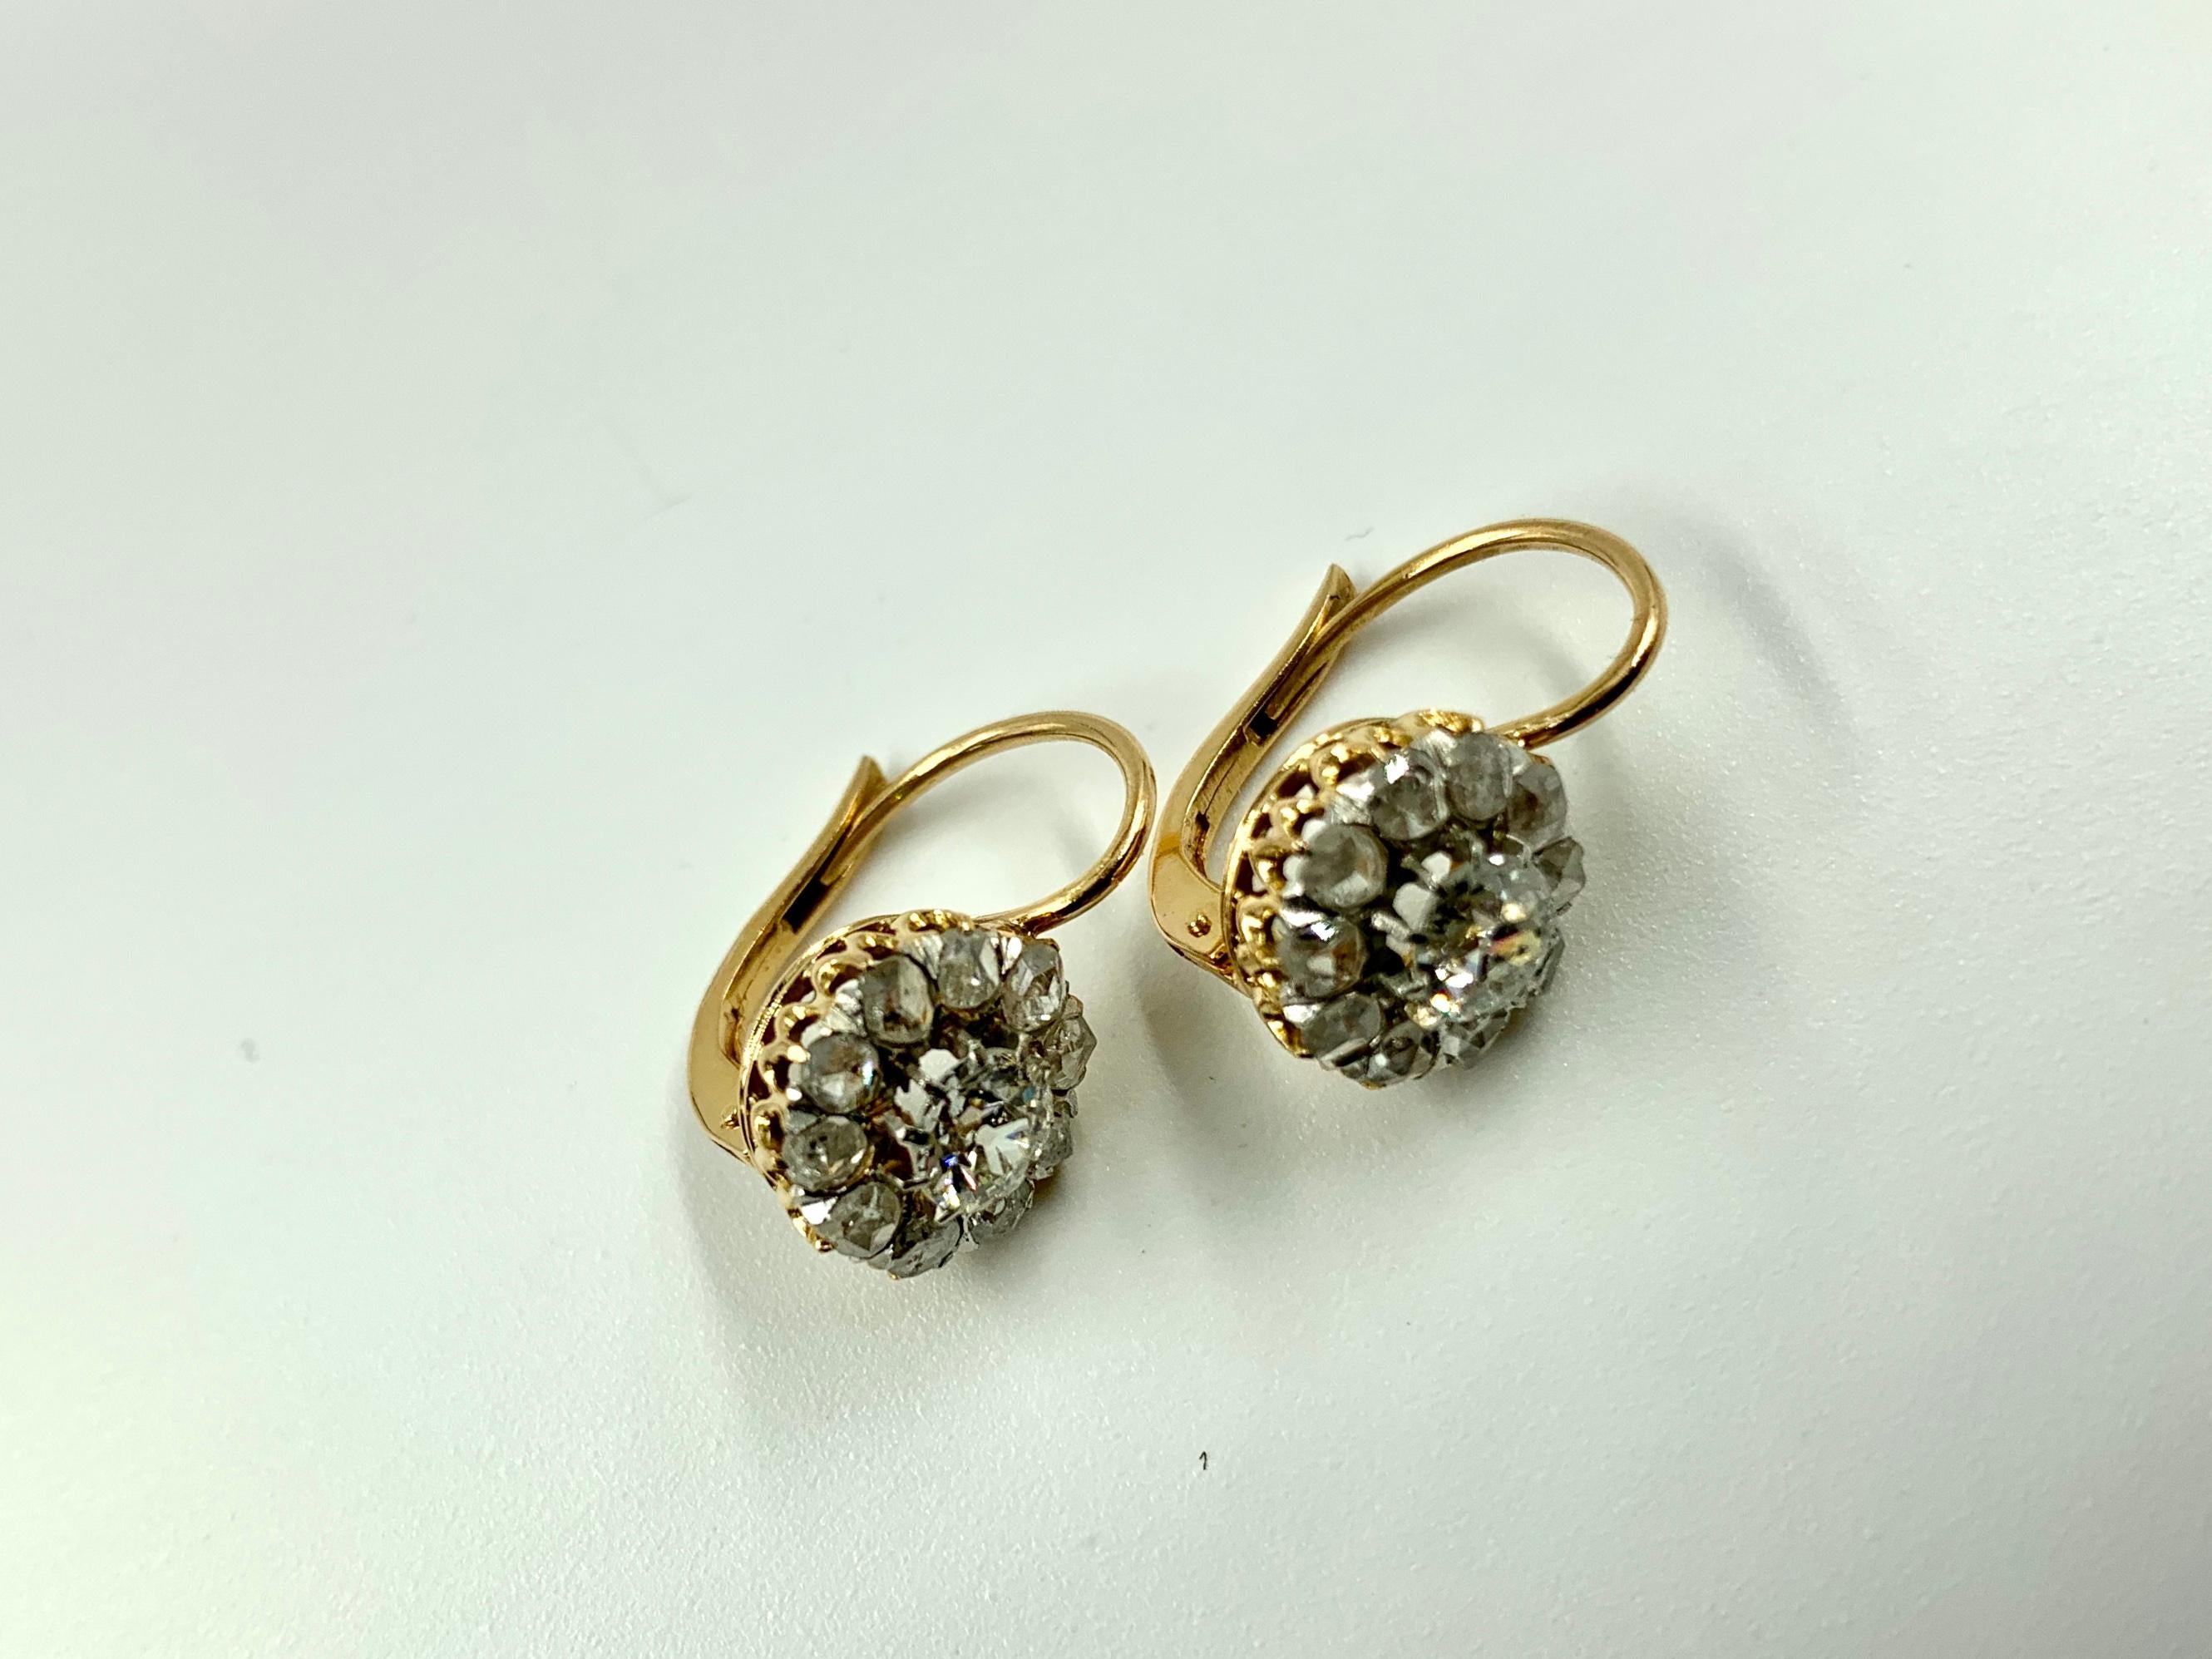 Classic Russian diamond flower form earrings with central full cut diamonds each surrounded by ten smaller old mine cut diamonds forming the petals set in 14k gold (tested) unmarked, approximately 2 carat total weight. 
Dormeuse is french for